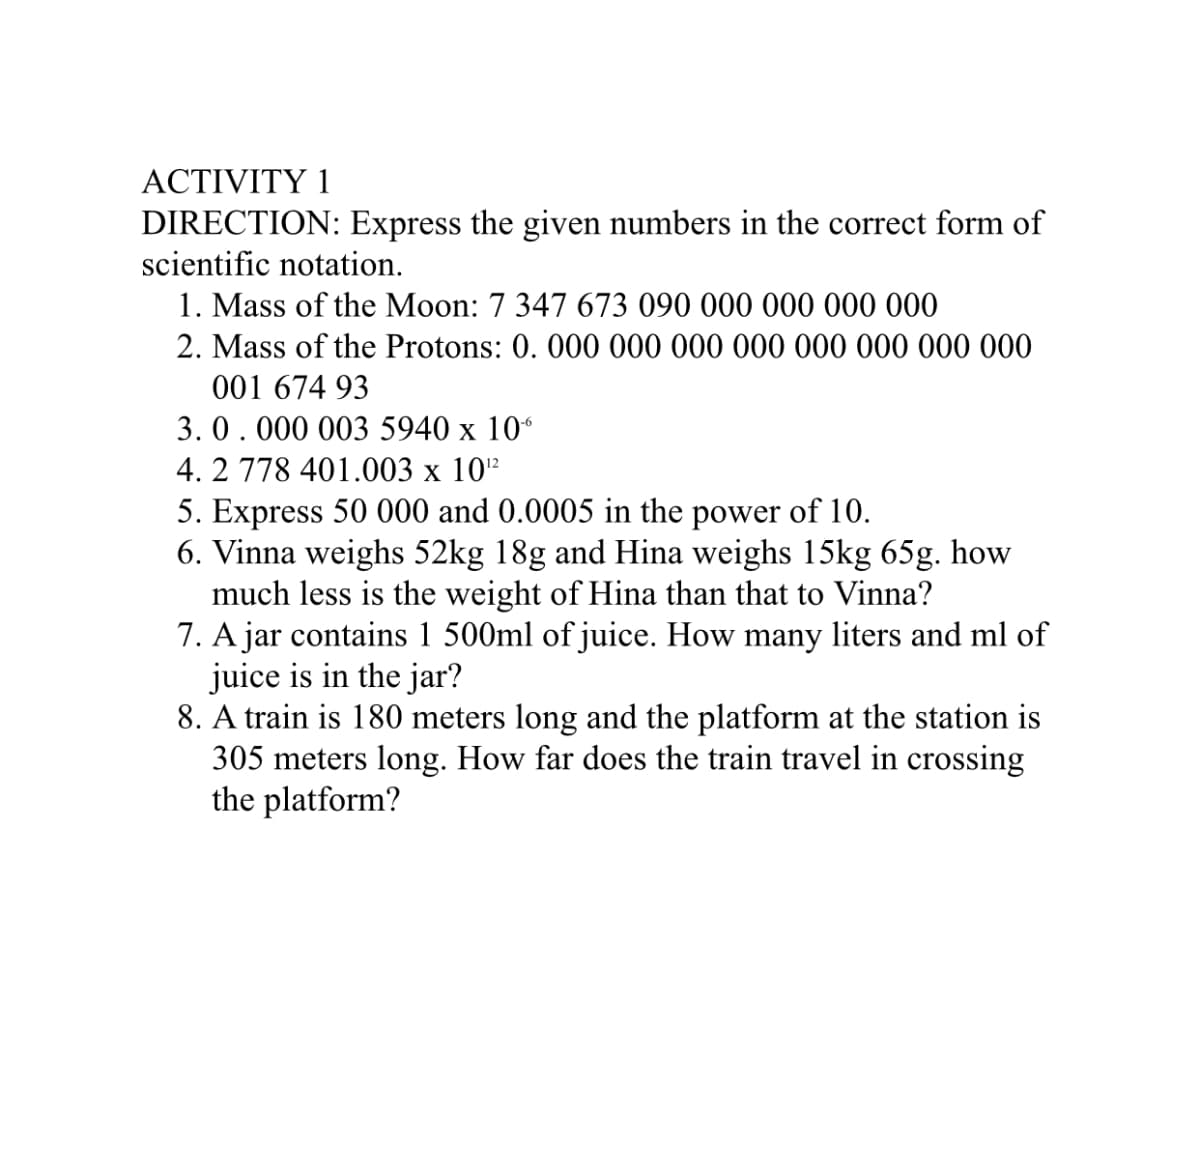 ACTIVITY 1
DIRECTION: Express the given numbers in the correct form of
scientific notation.
1. Mass of the Moon: 7 347 673 090 000 000 000 000
2. Mass of the Protons: 0. 000 000 000 000 000 000 000 000
001 674 93
3.0.000 003 5940 x 10“
4. 2 778 401.003 x 10"
5. Express 50 000 and 0.0005 in the power of 10.
6. Vinna weighs 52kg 18g and Hina weighs 15kg 65g. how
much less is the weight of Hina than that to Vinna?
7. A jar contains 1 500ml of juice. How many liters and ml of
juice is in the jar?
8. A train is 180 meters long and the platform at the station is
305 meters long. How far does the train travel in crossing
the platform?
